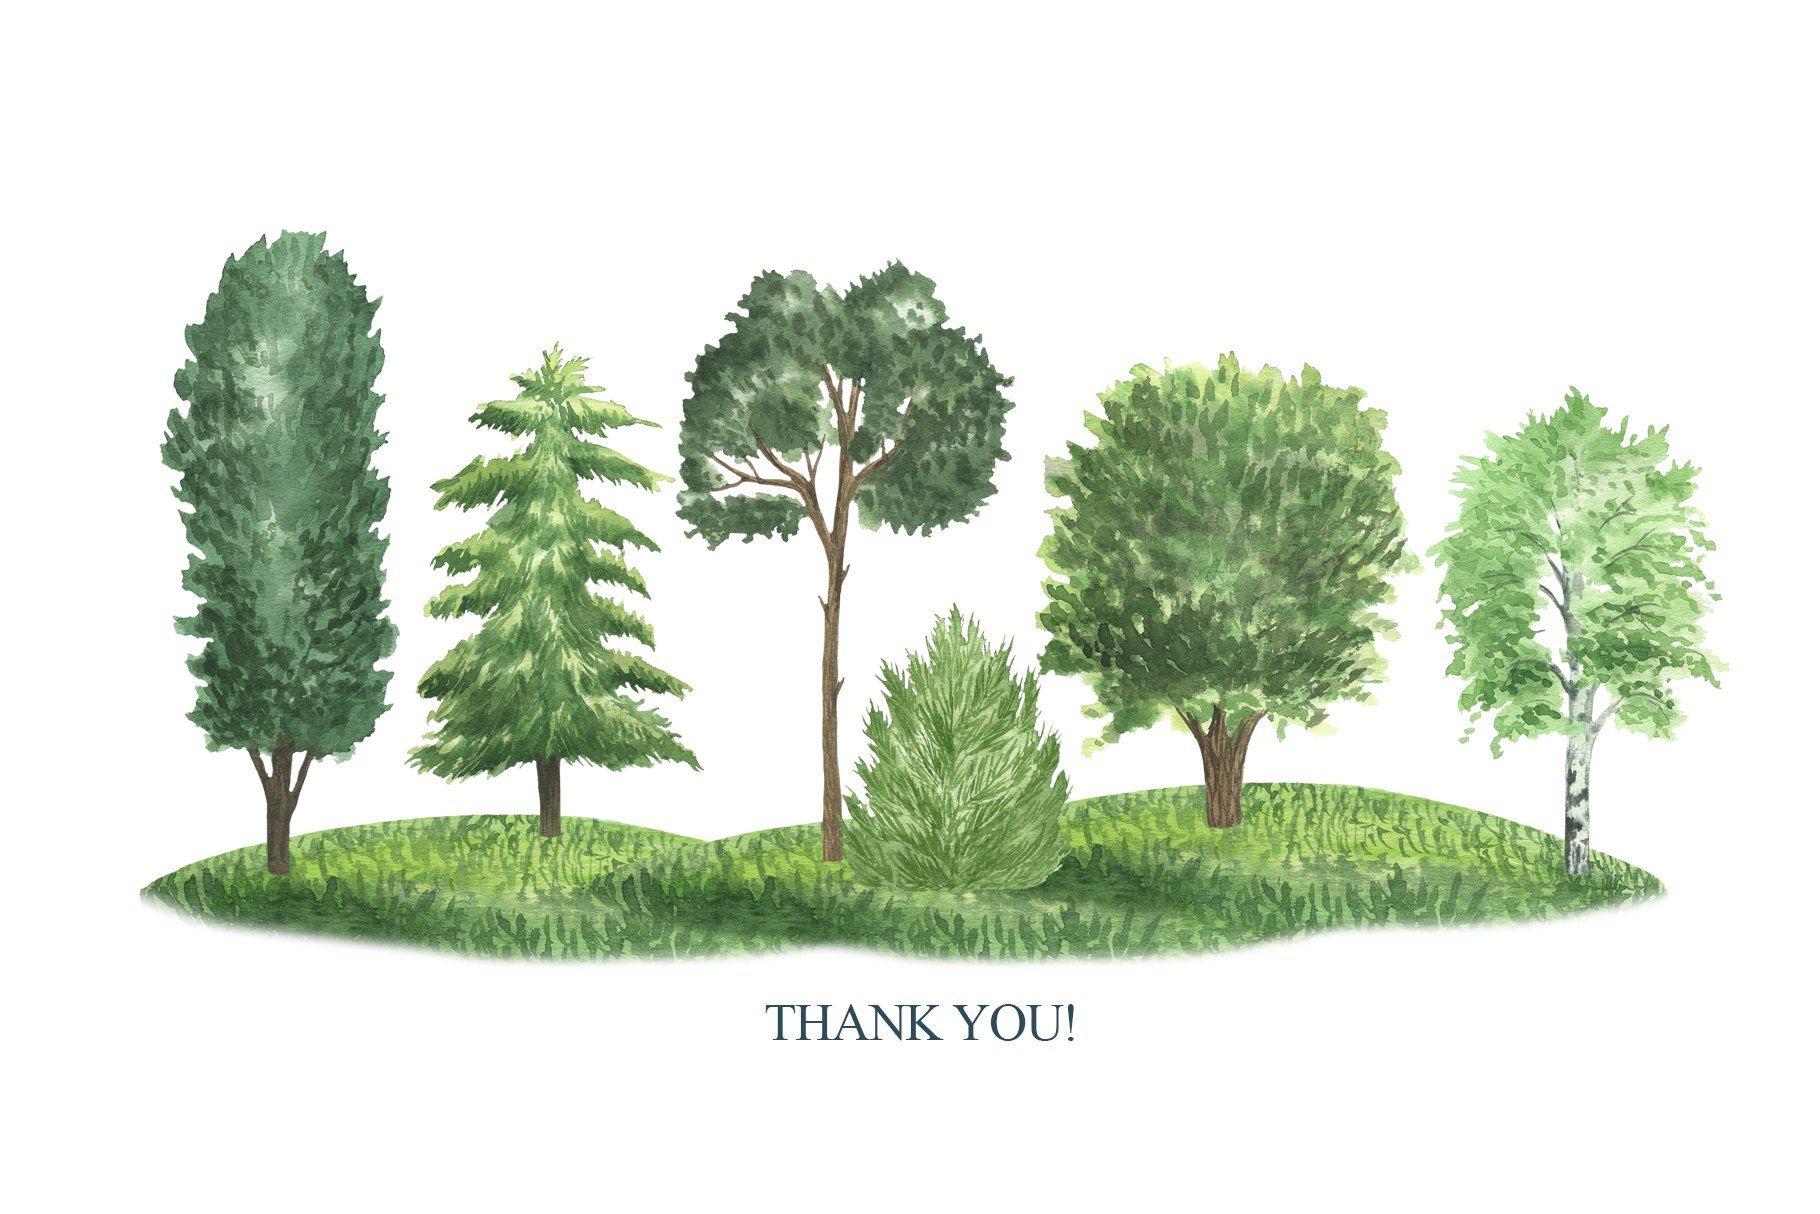 Watercolor painting of trees and a thank you card.